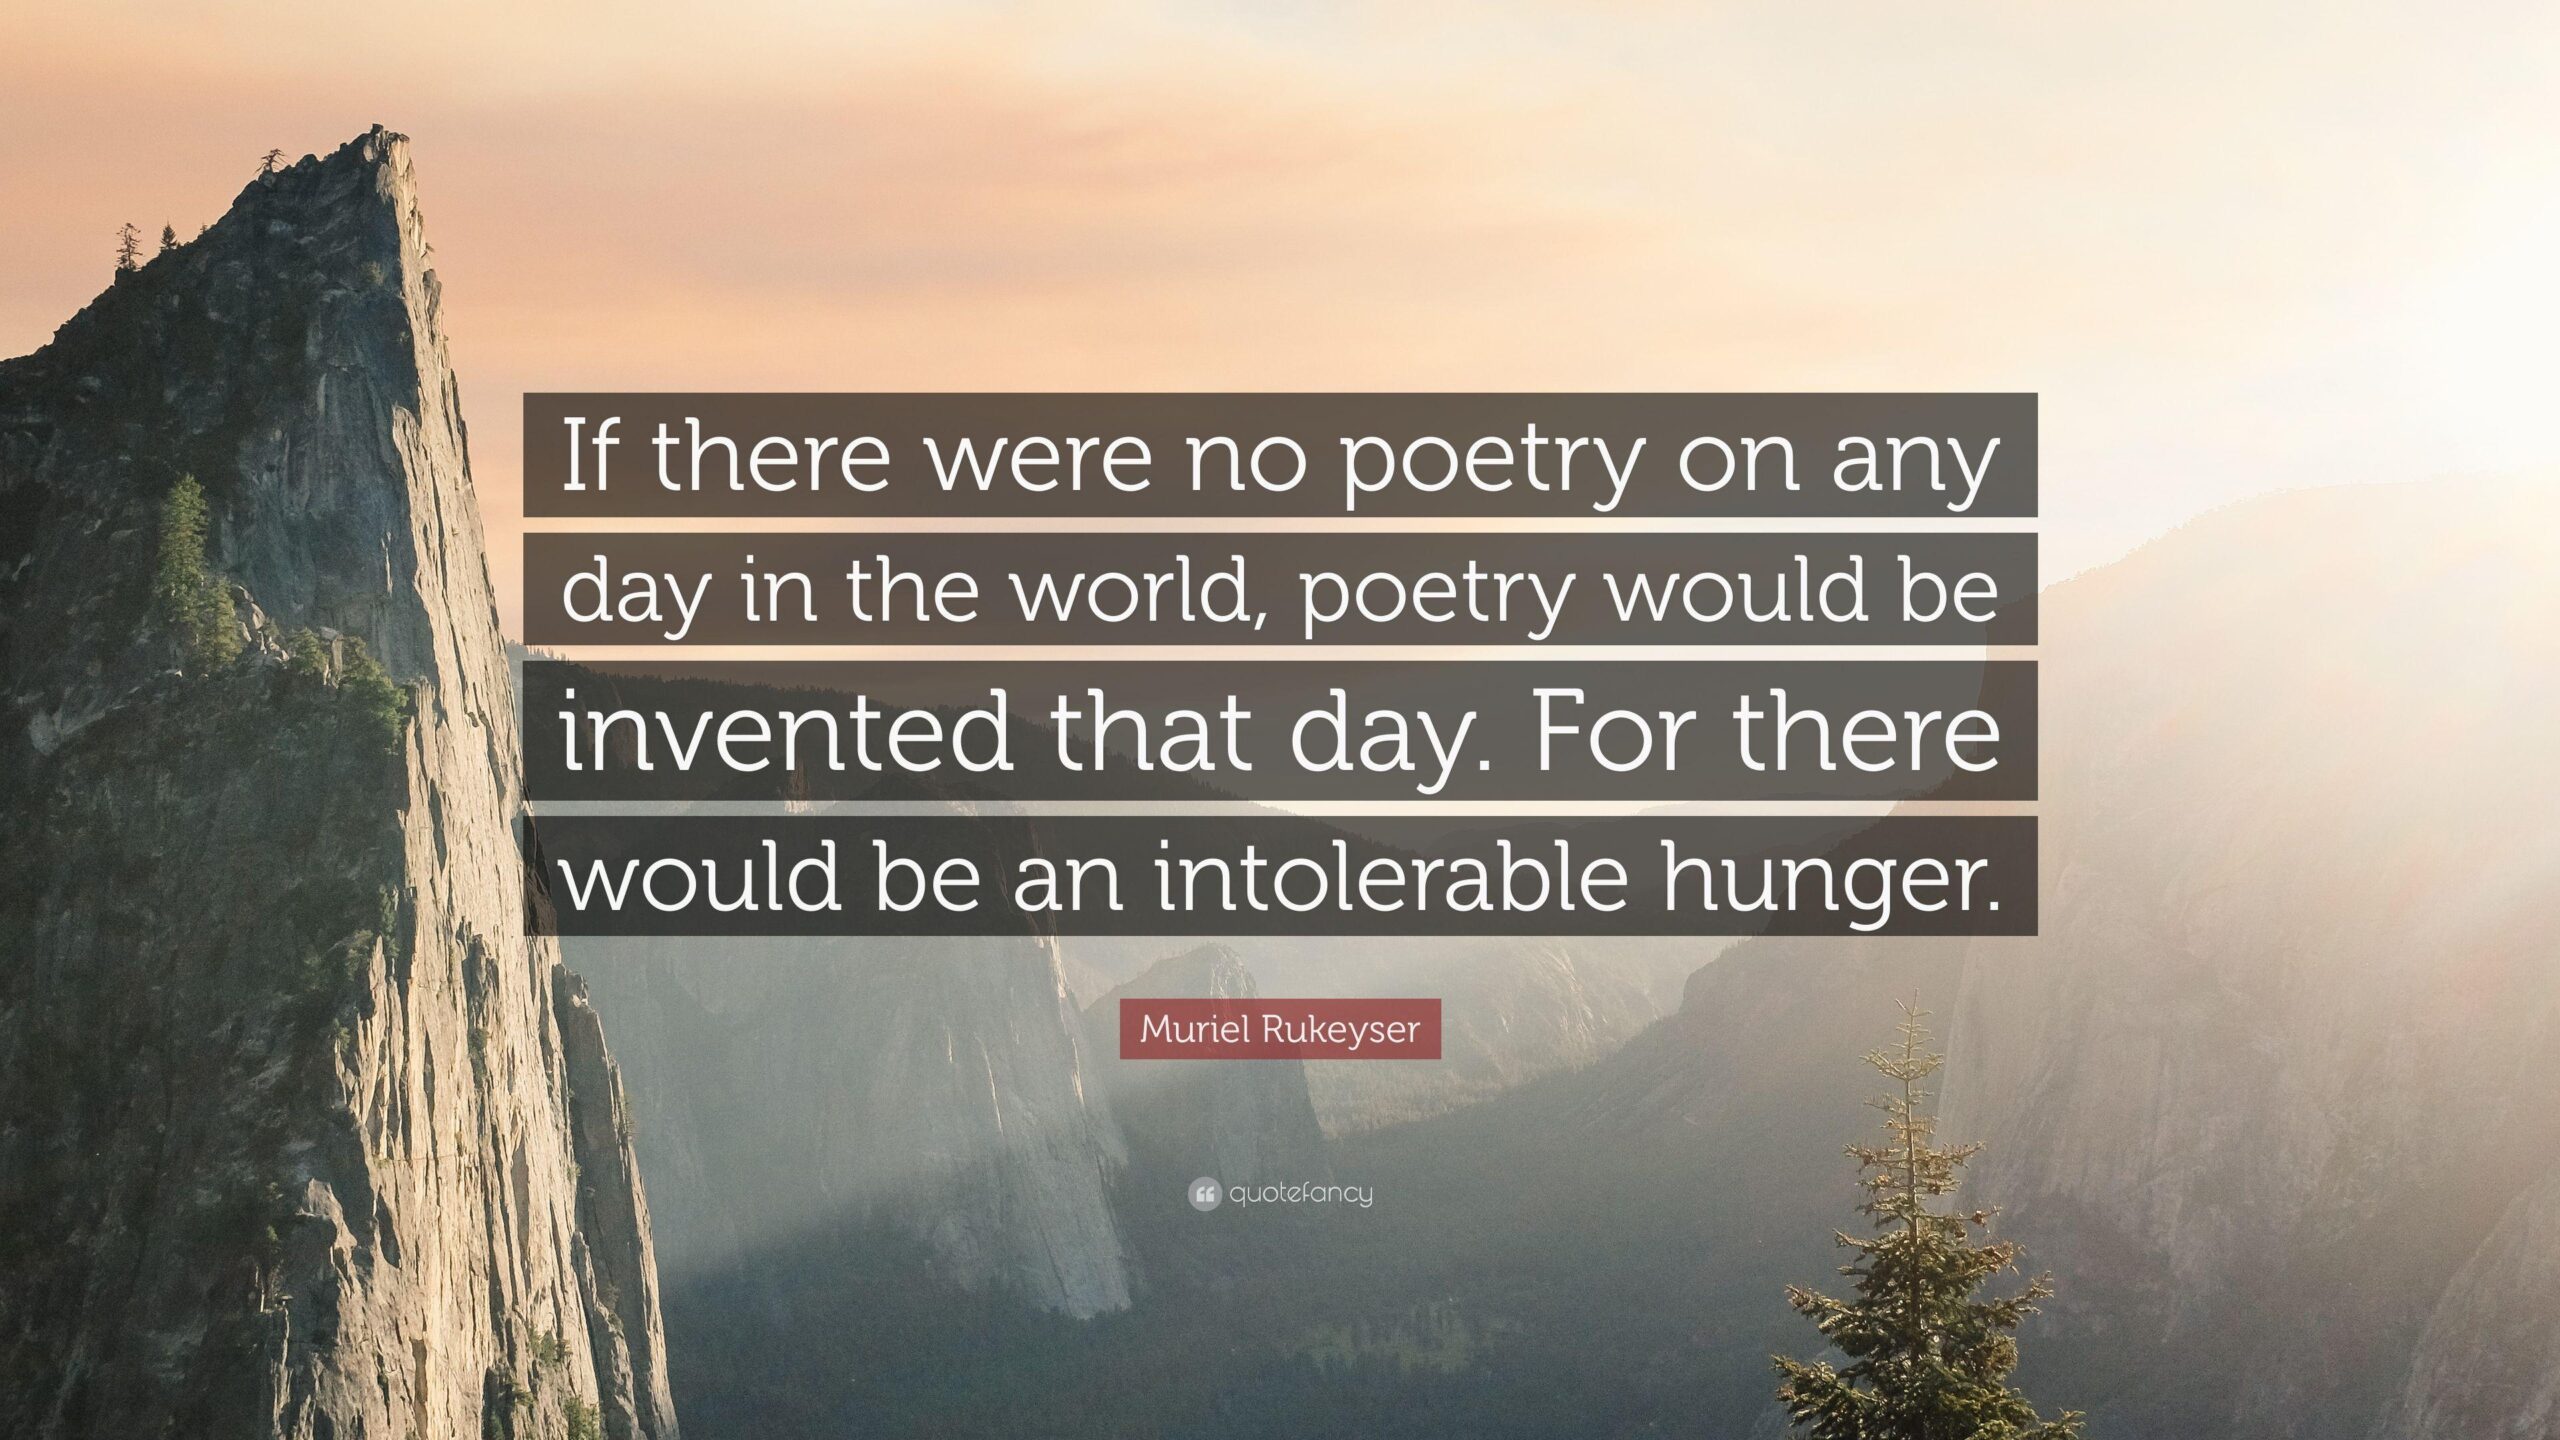 Muriel Rukeyser Quote “If there were no poetry on any day in the